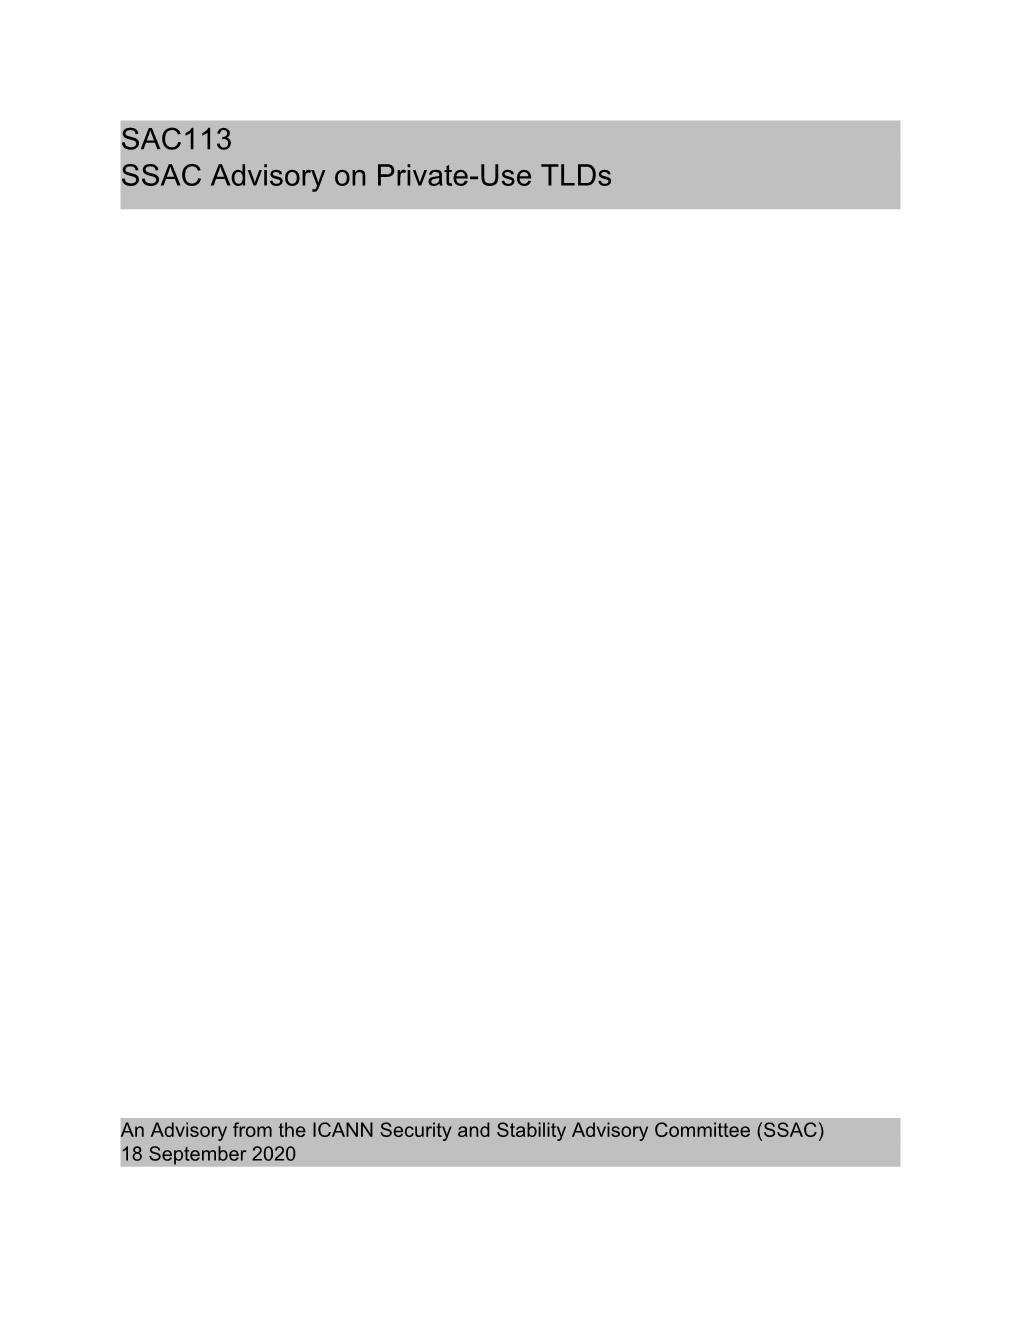 SAC113 SSAC Advisory on Private-Use Tlds